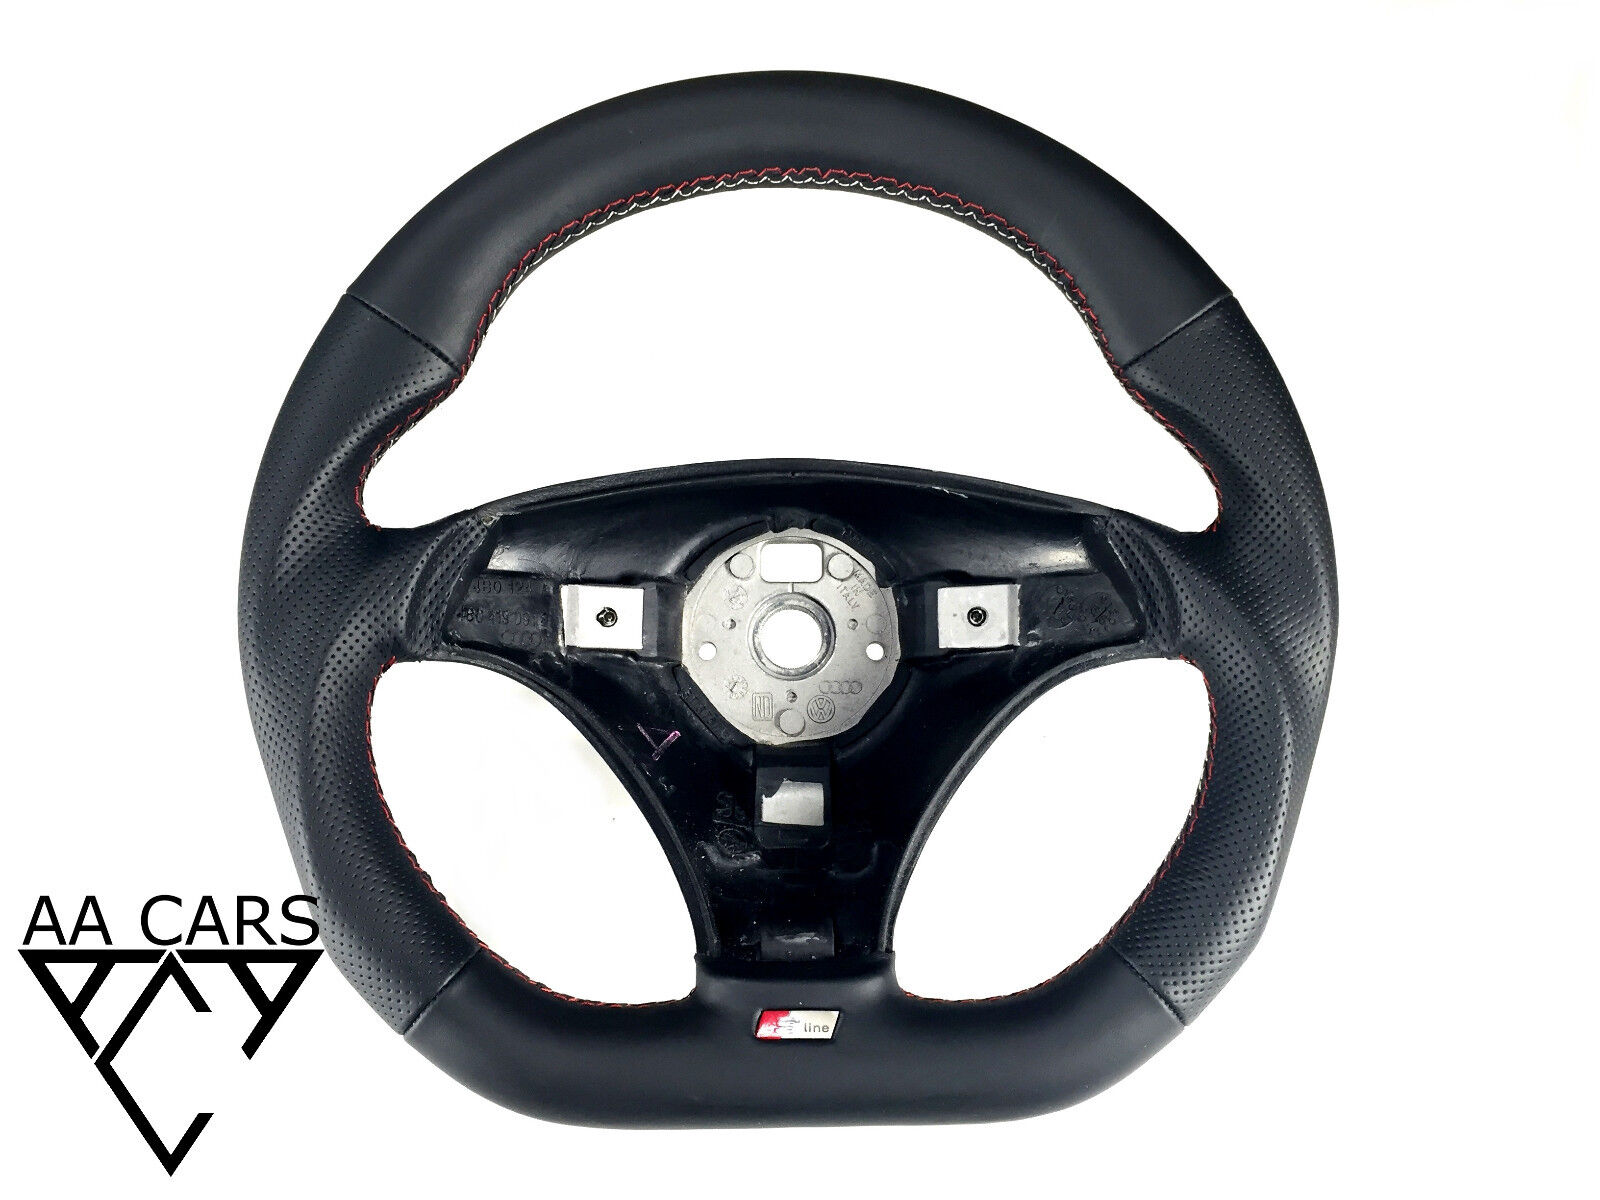  Steering Wheel AUDI a4 s4 b5 s6 a6 c5 a8 s8 d2 TT MK1 Flat Bottom new Leather